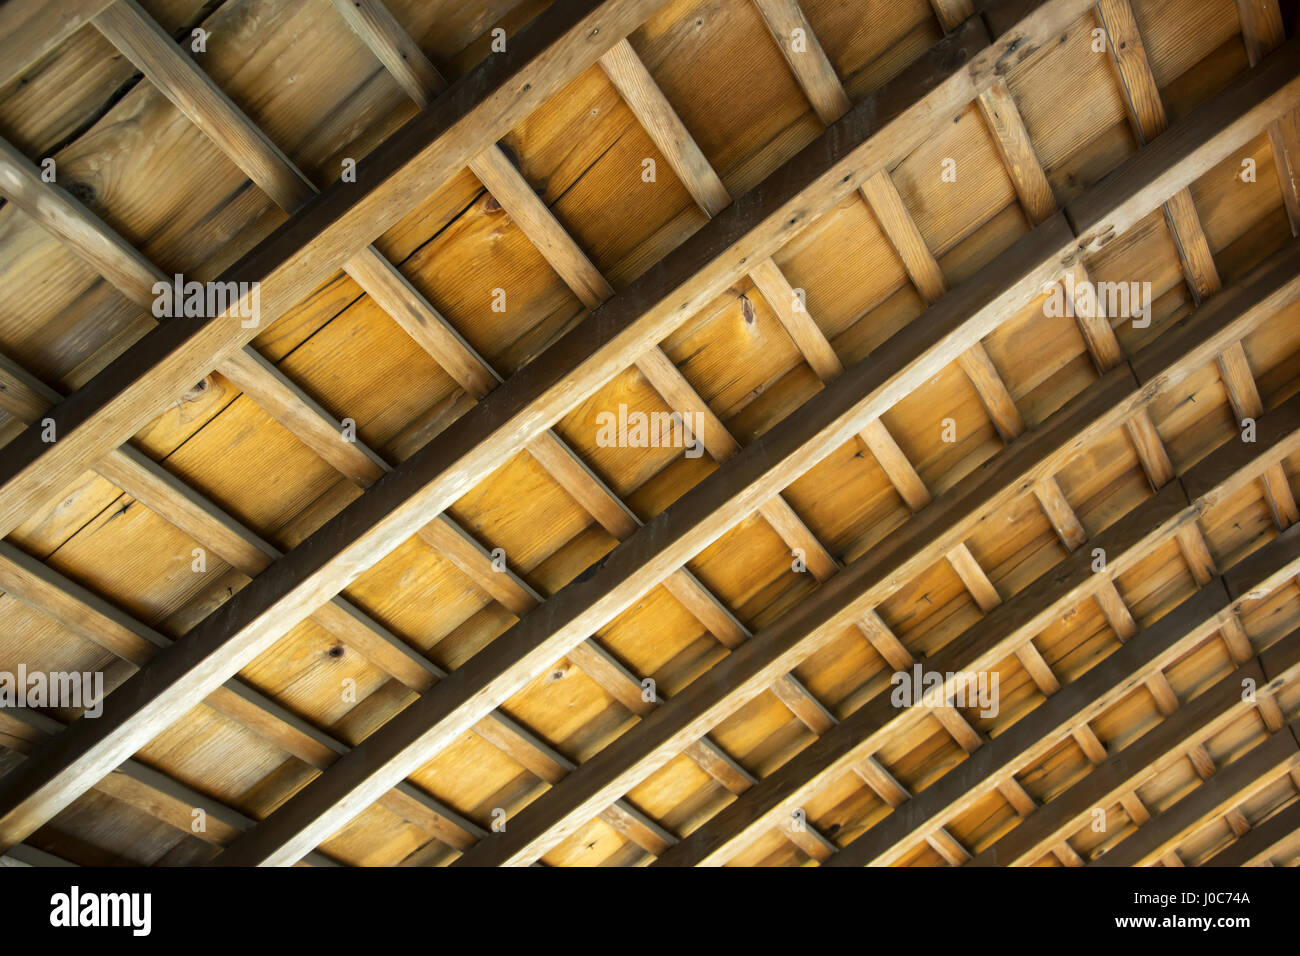 Japanese traditional room ceiling details Stock Photo